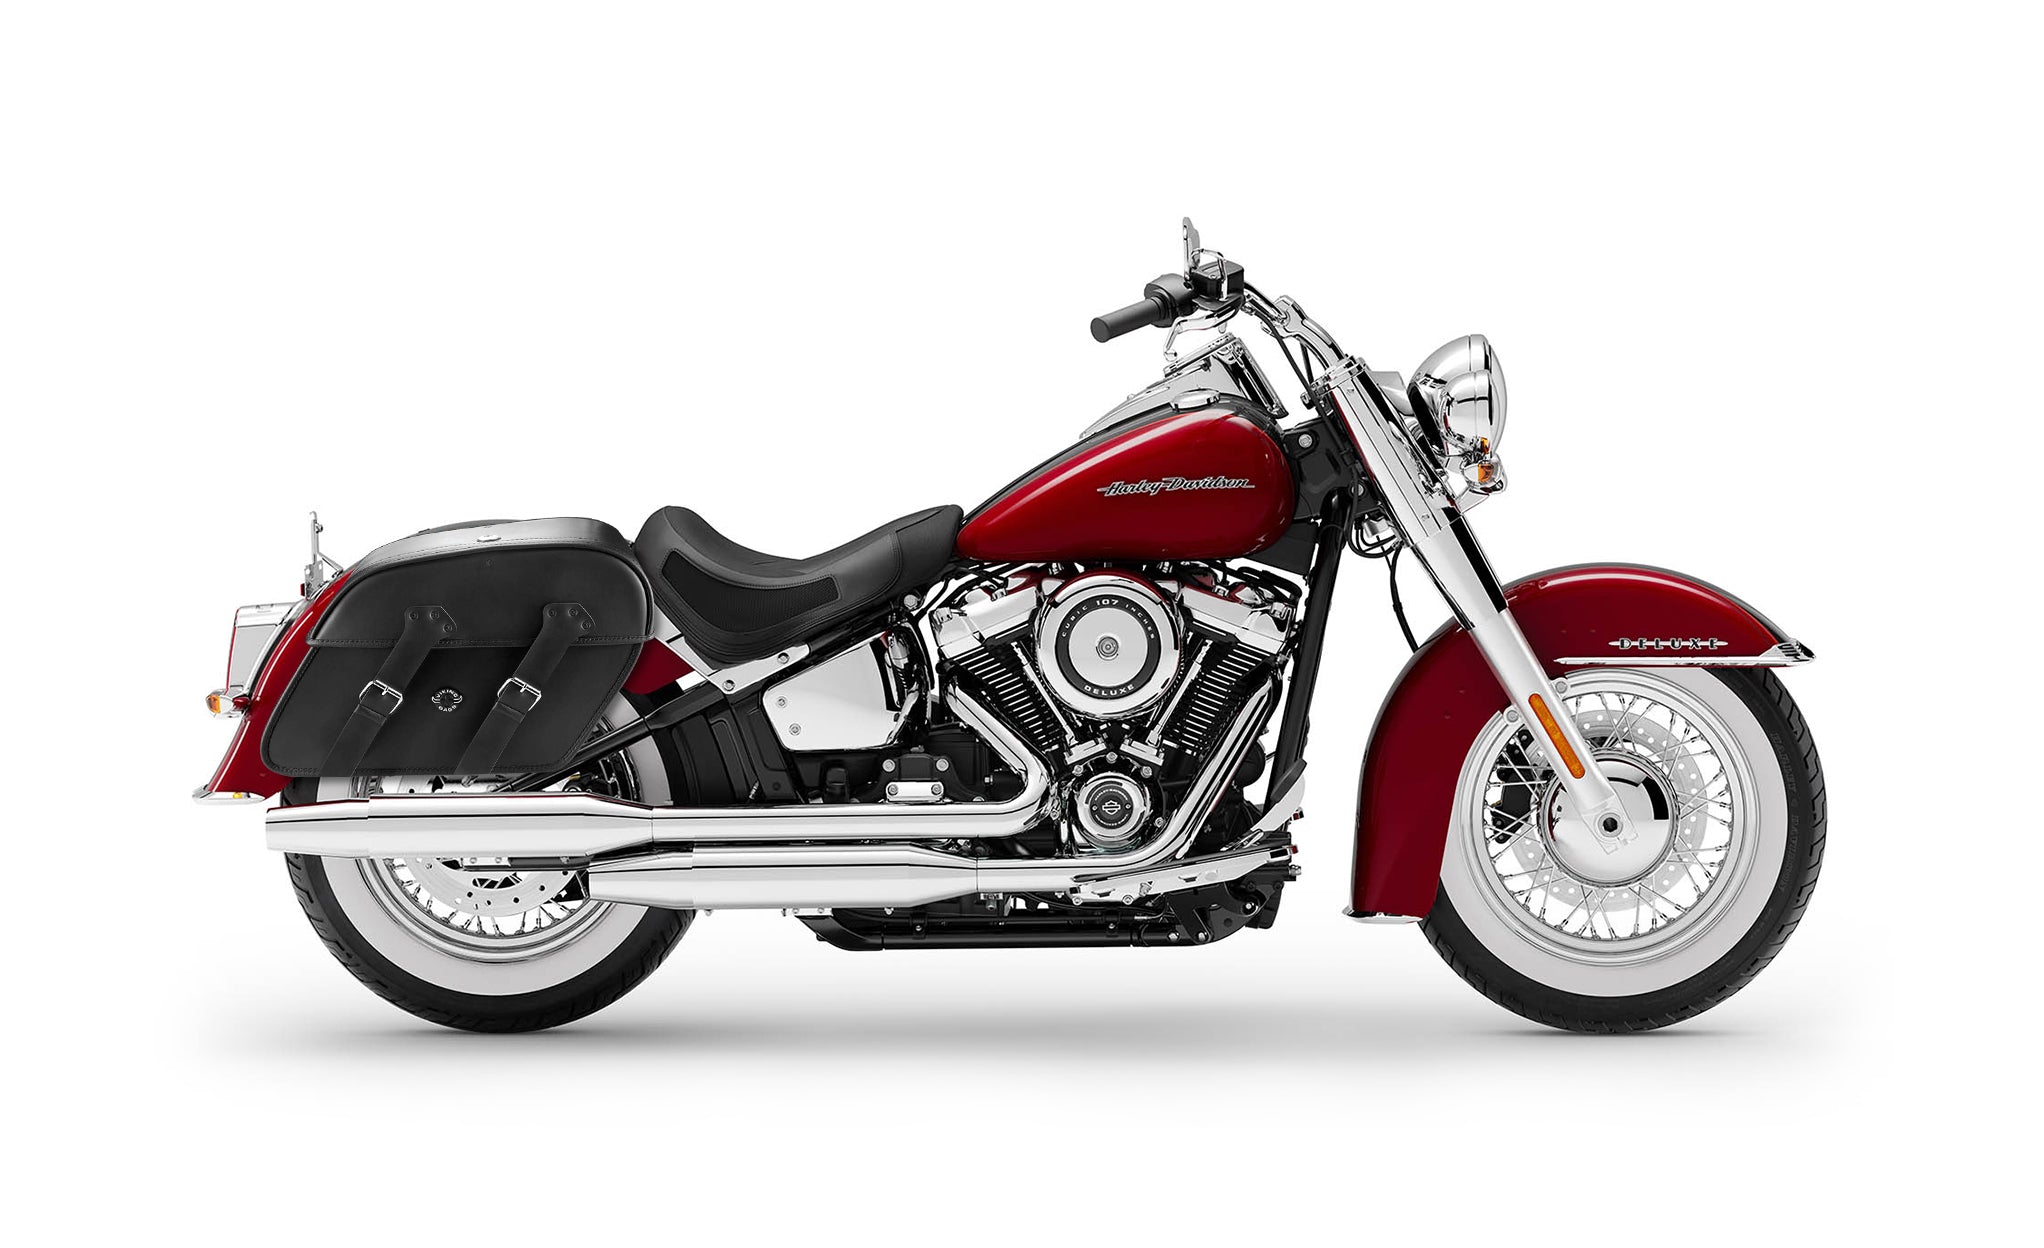 40L - Raven Extra Large Leather Saddlebags for Harley Softail Deluxe FLDE on Bike Photo @expand